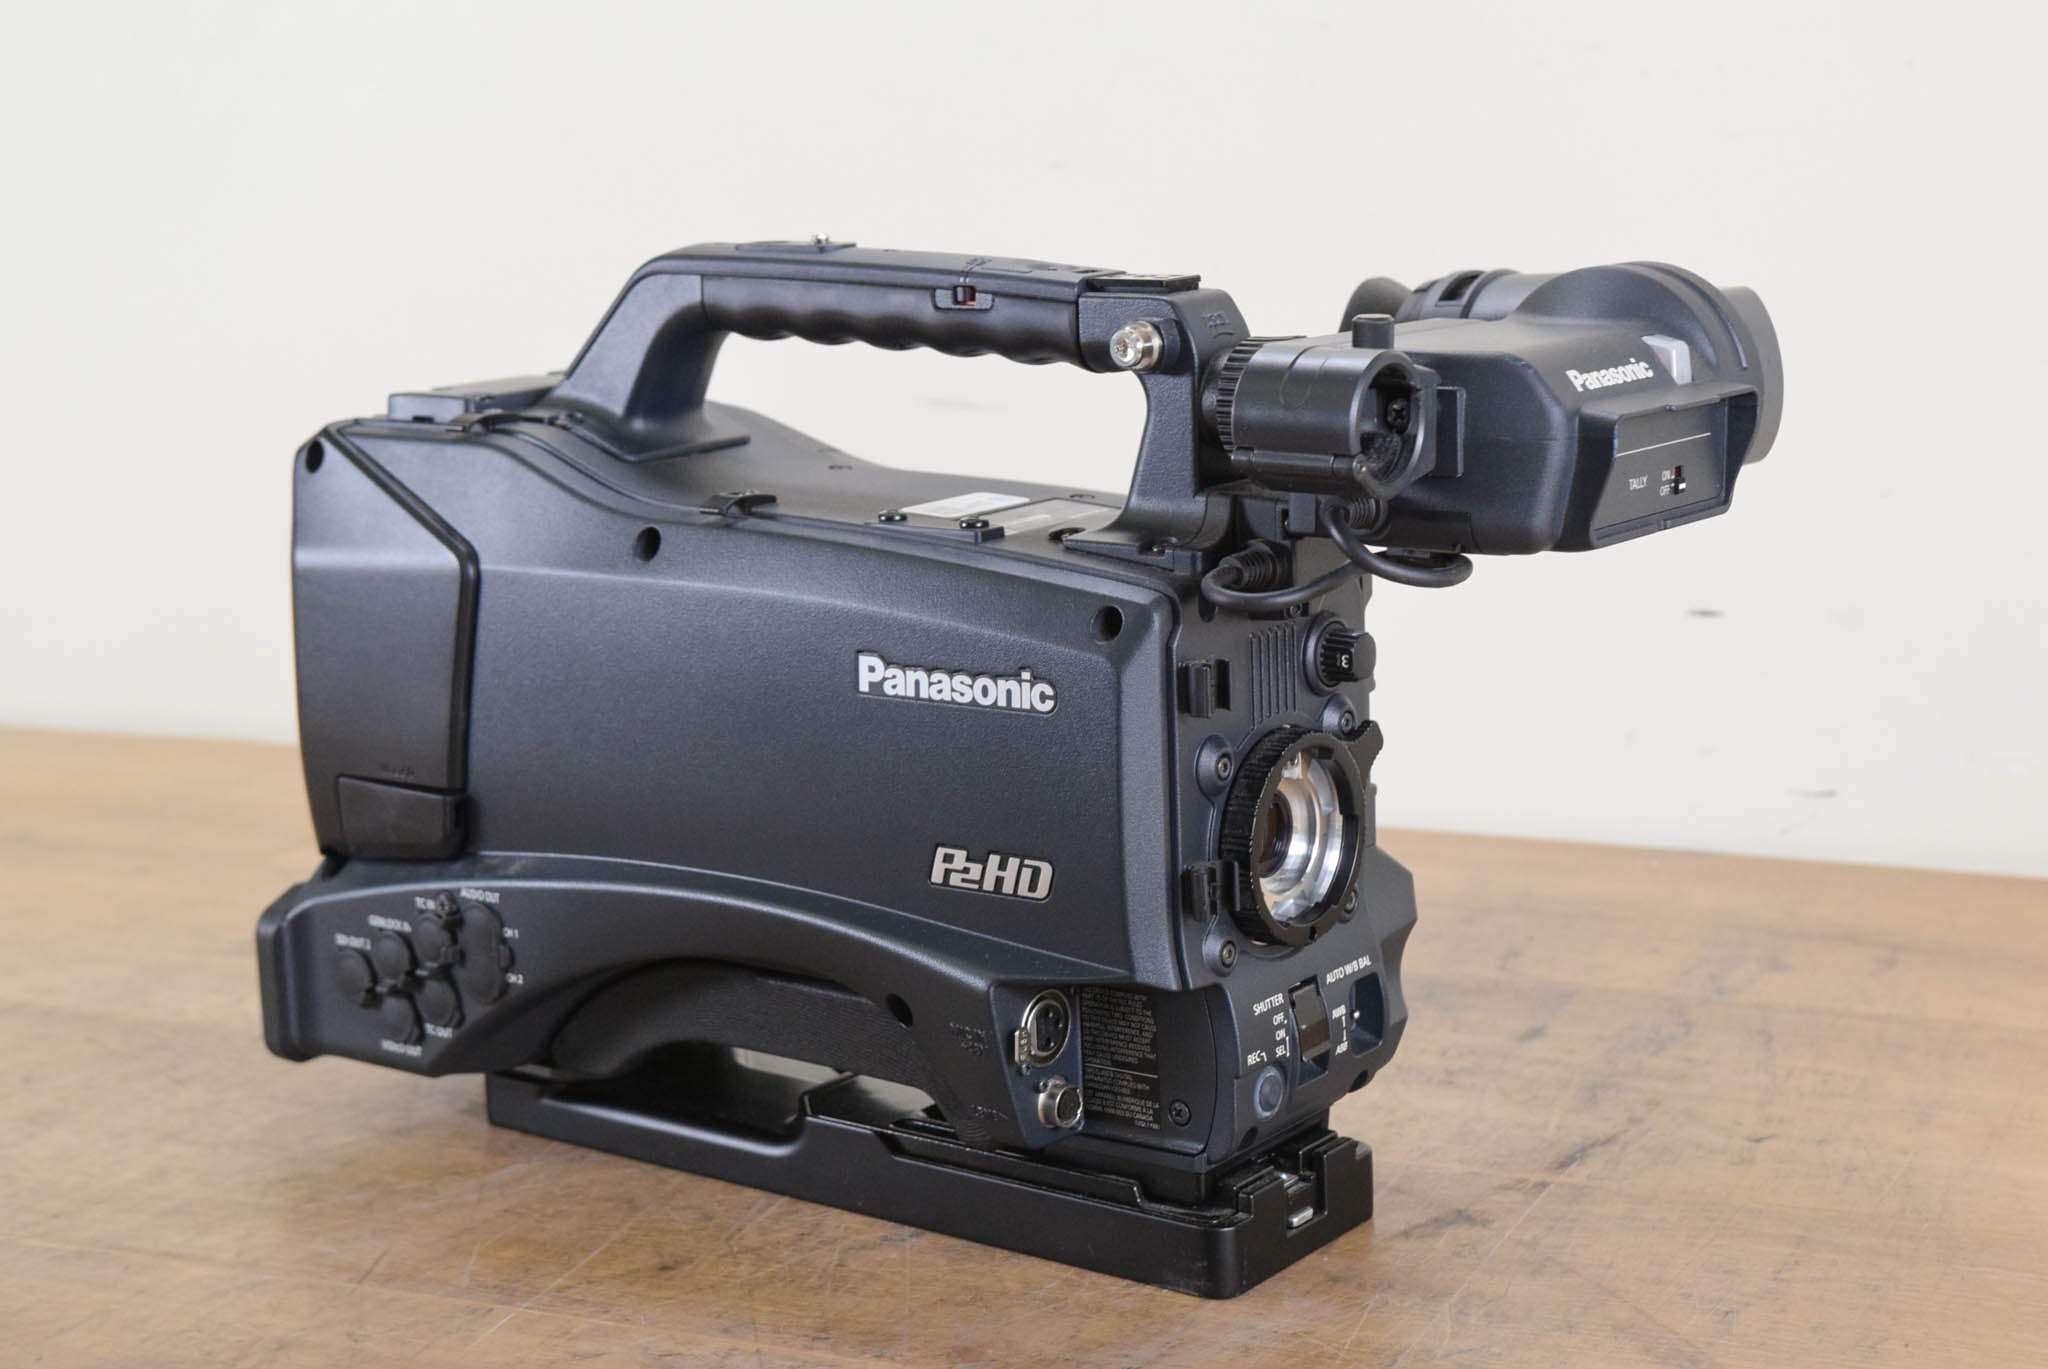 Panasonic AG-HPX370P P2HD Solid-State Video Camcorder